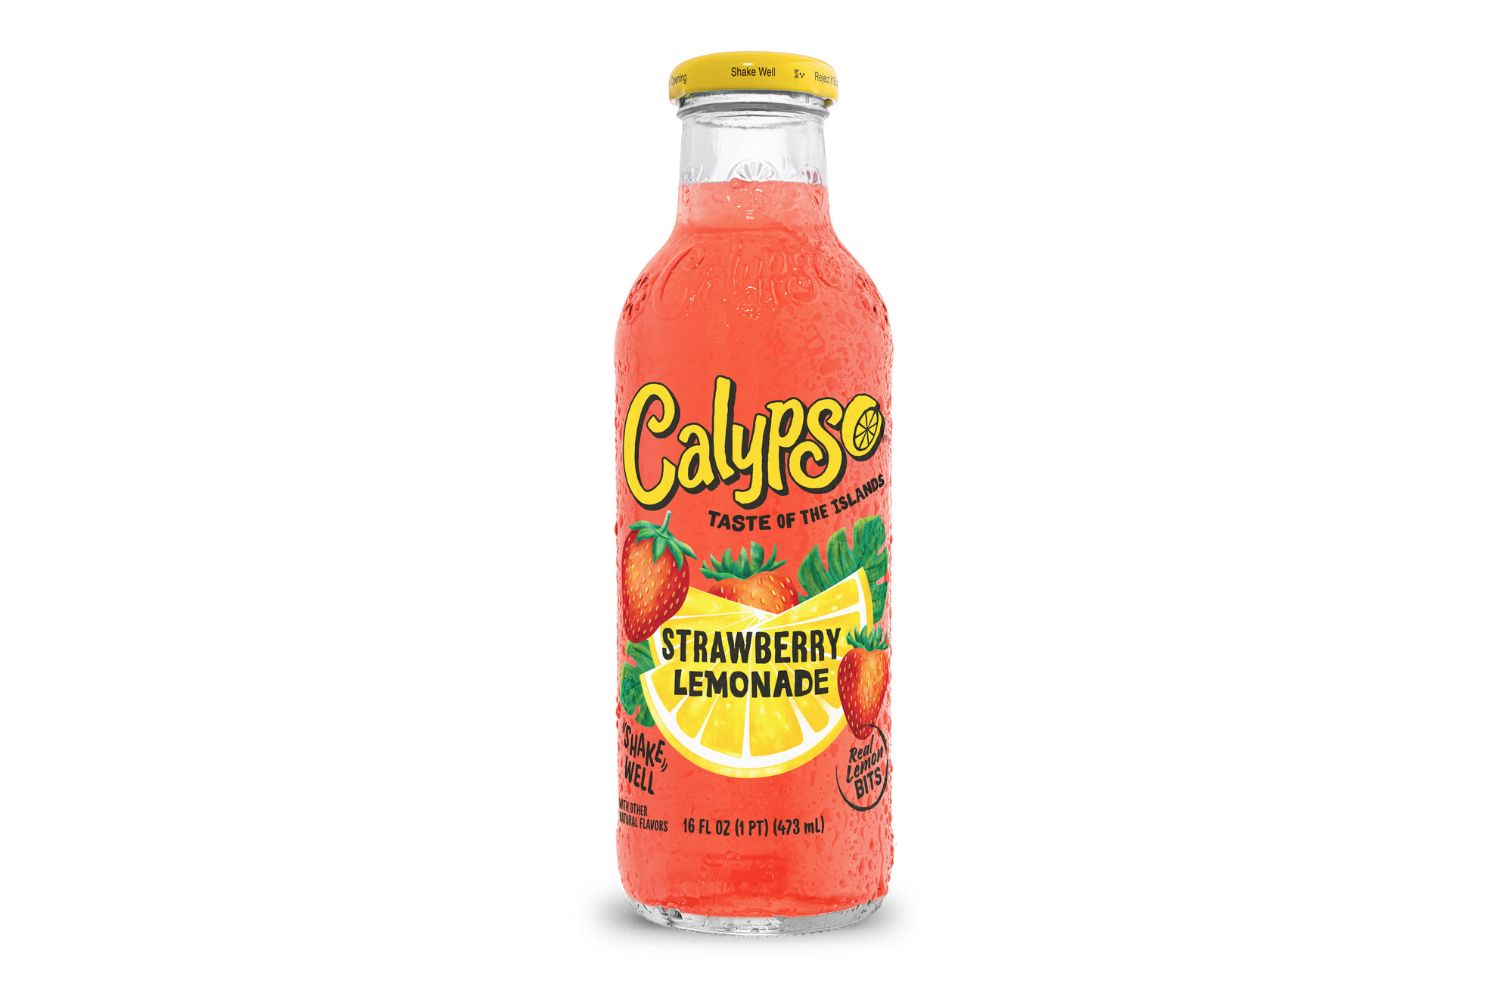 14-intriguing-facts-about-calypso-drink